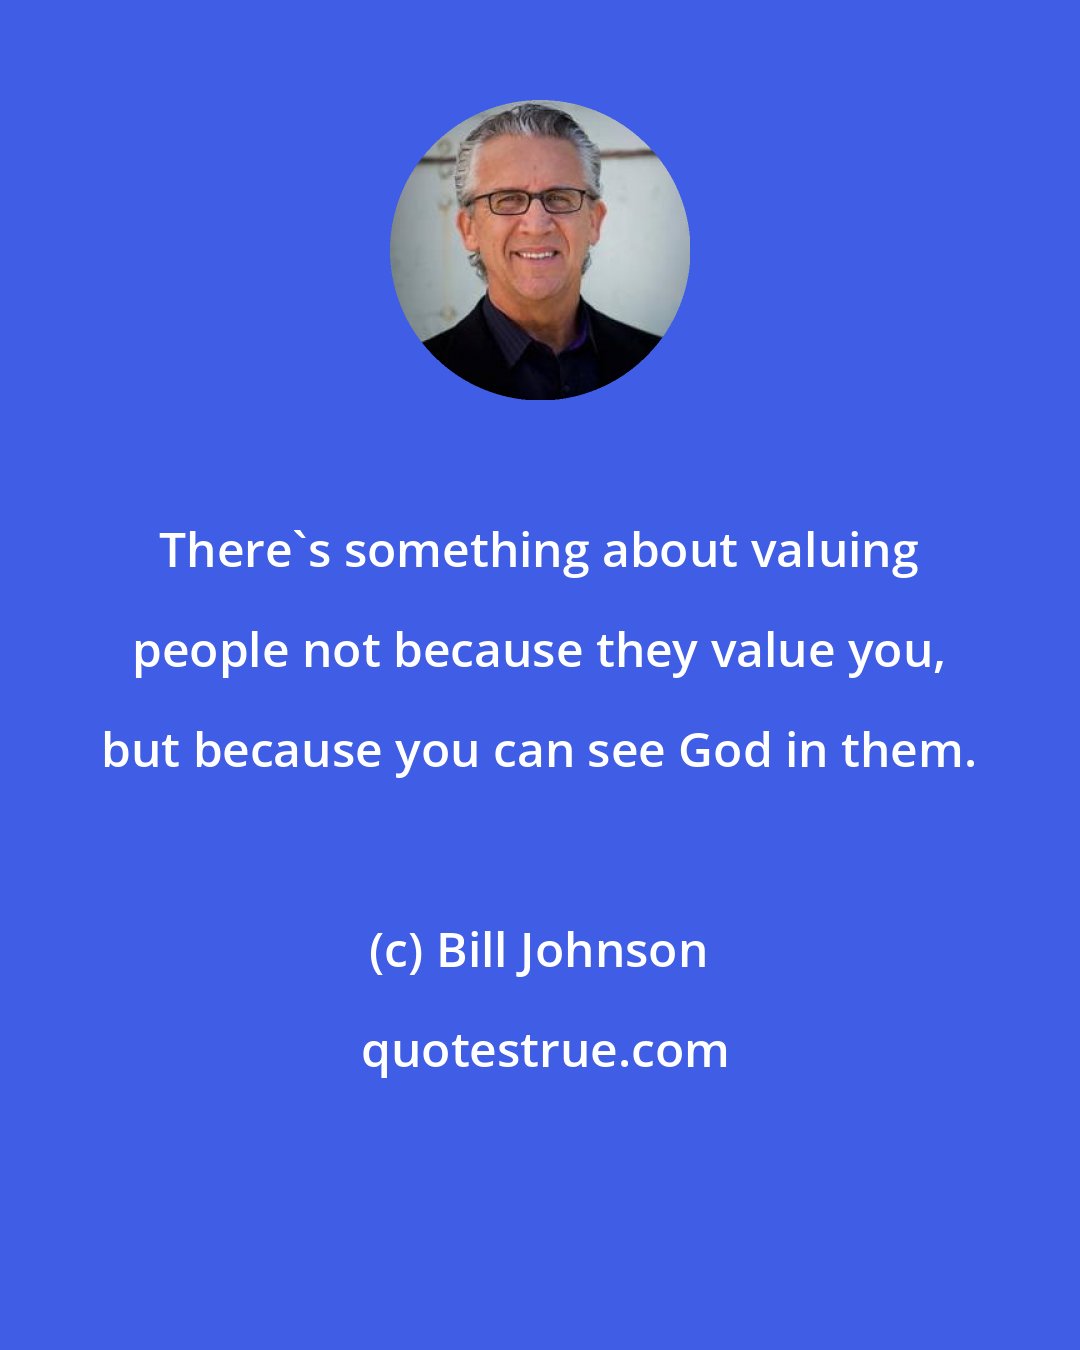 Bill Johnson: There's something about valuing people not because they value you, but because you can see God in them.